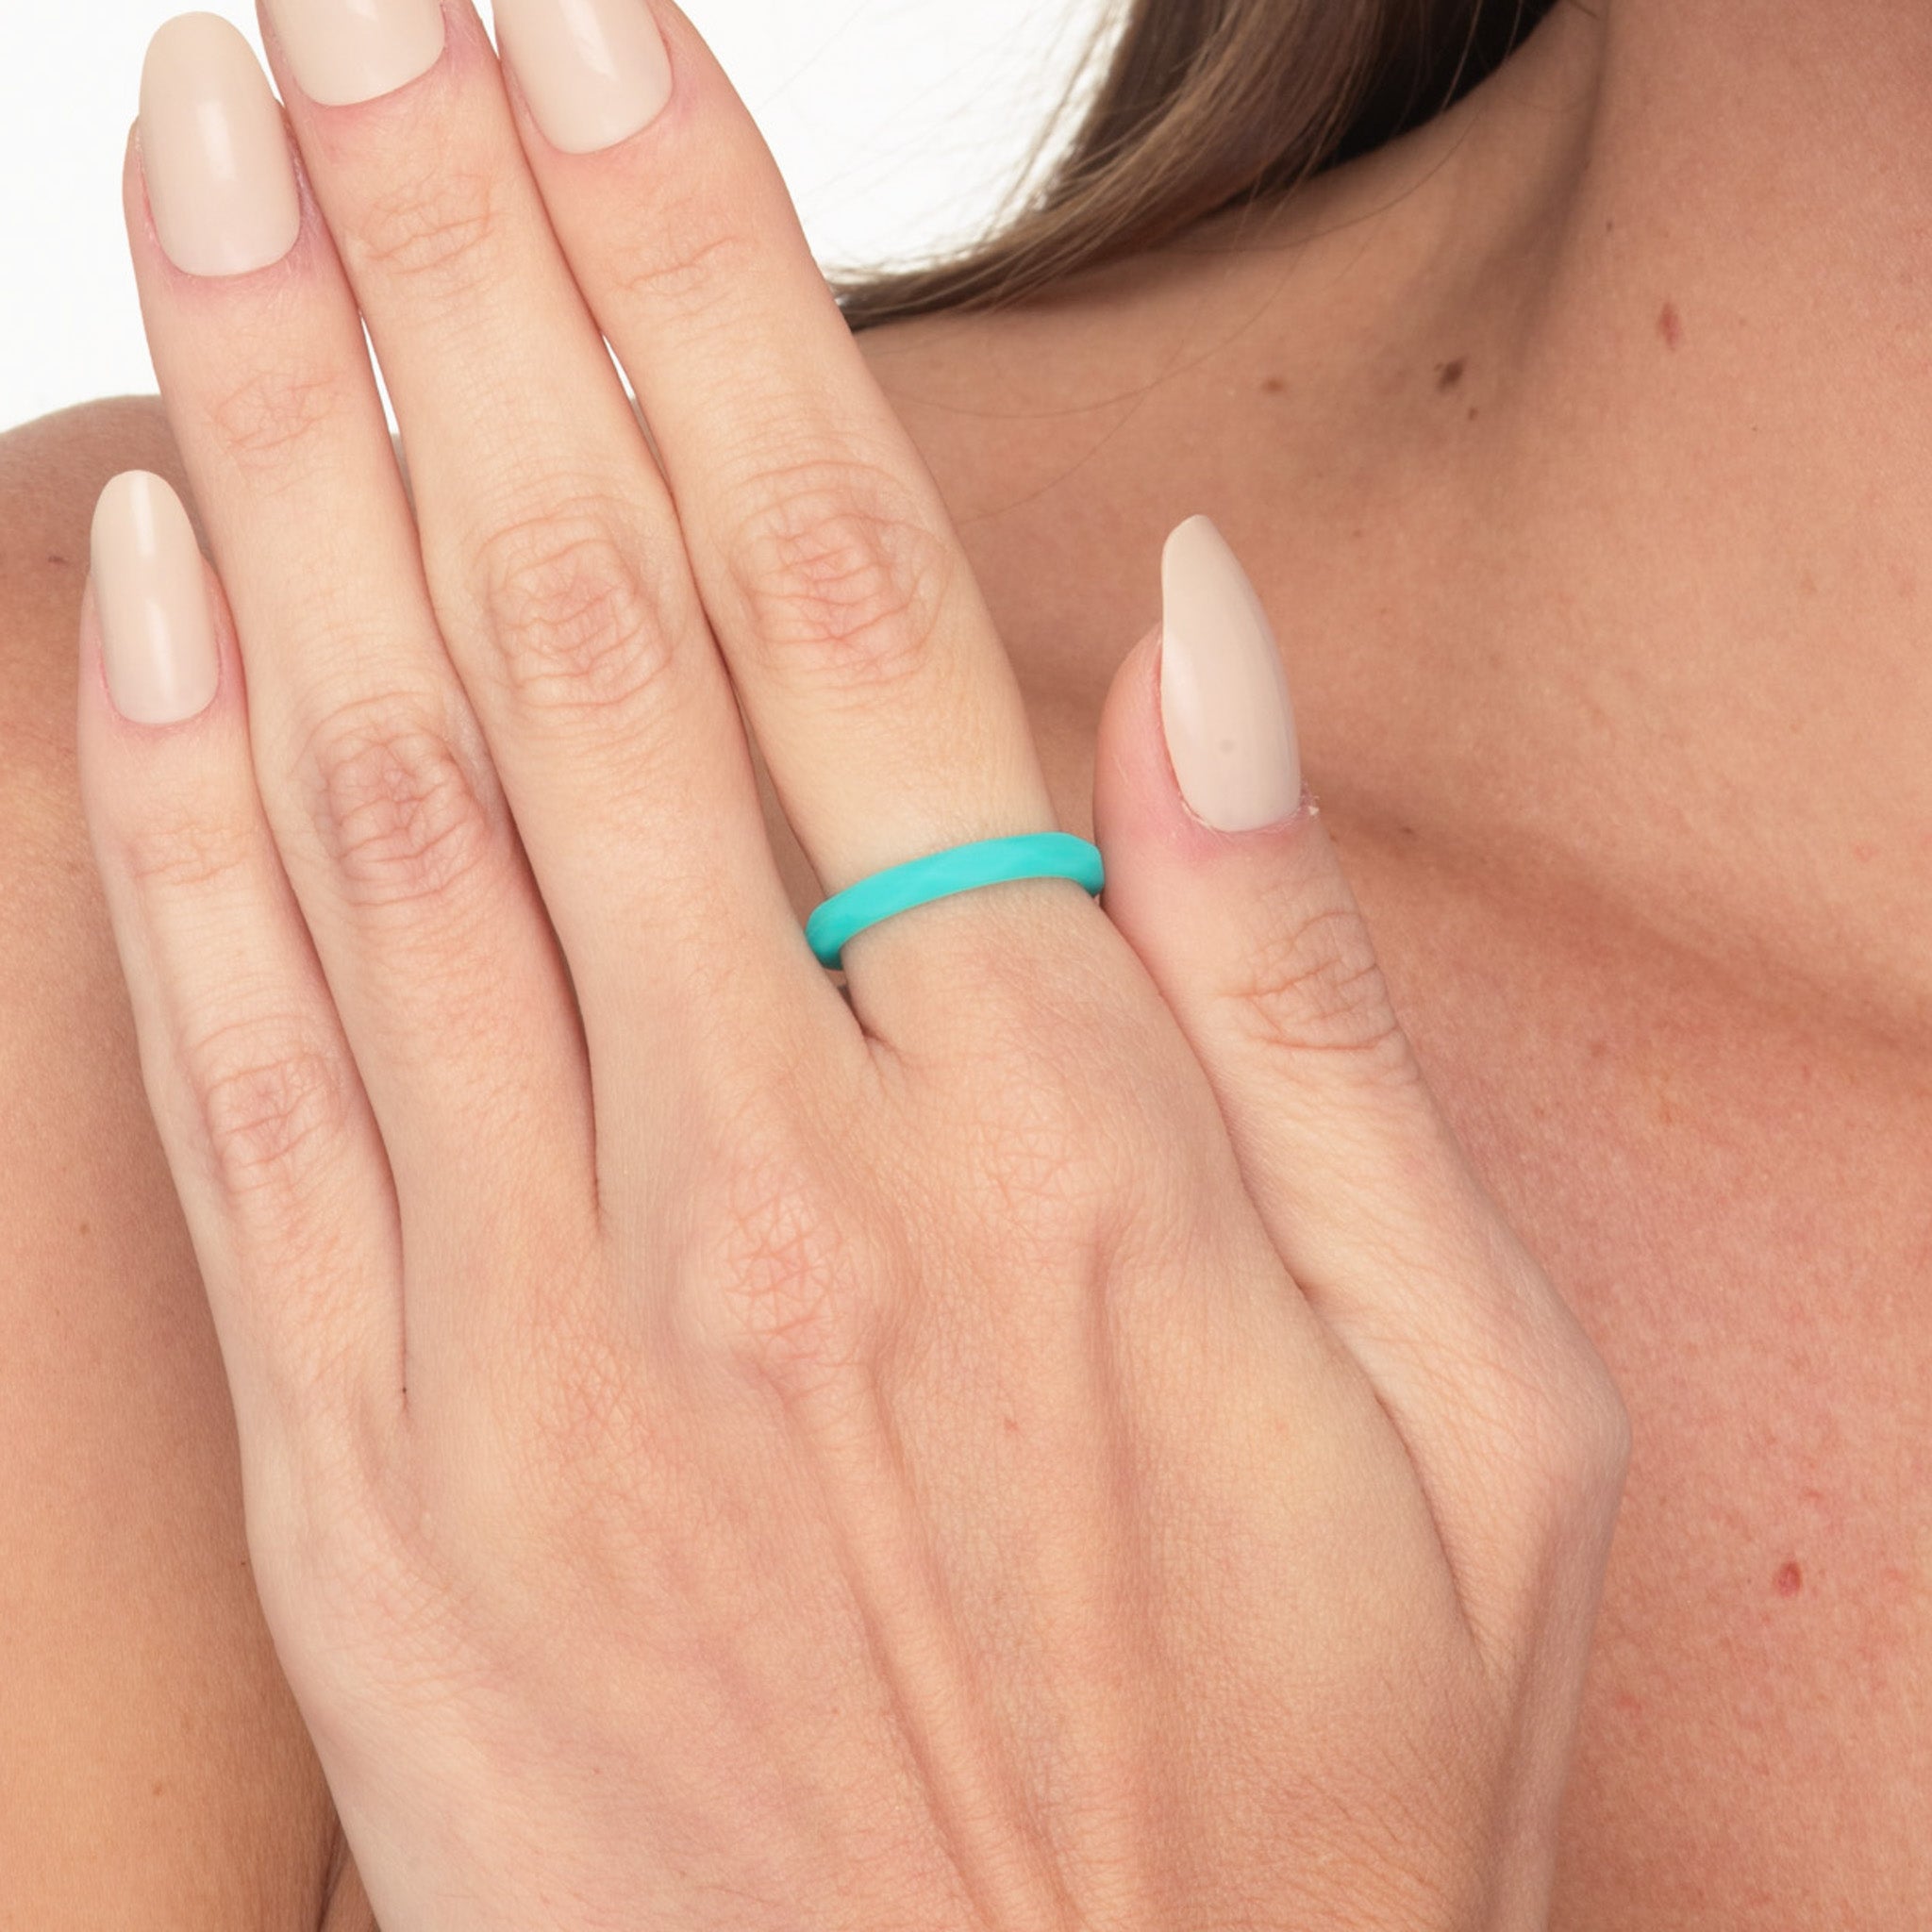 The Marine Mist - Silicone Ring